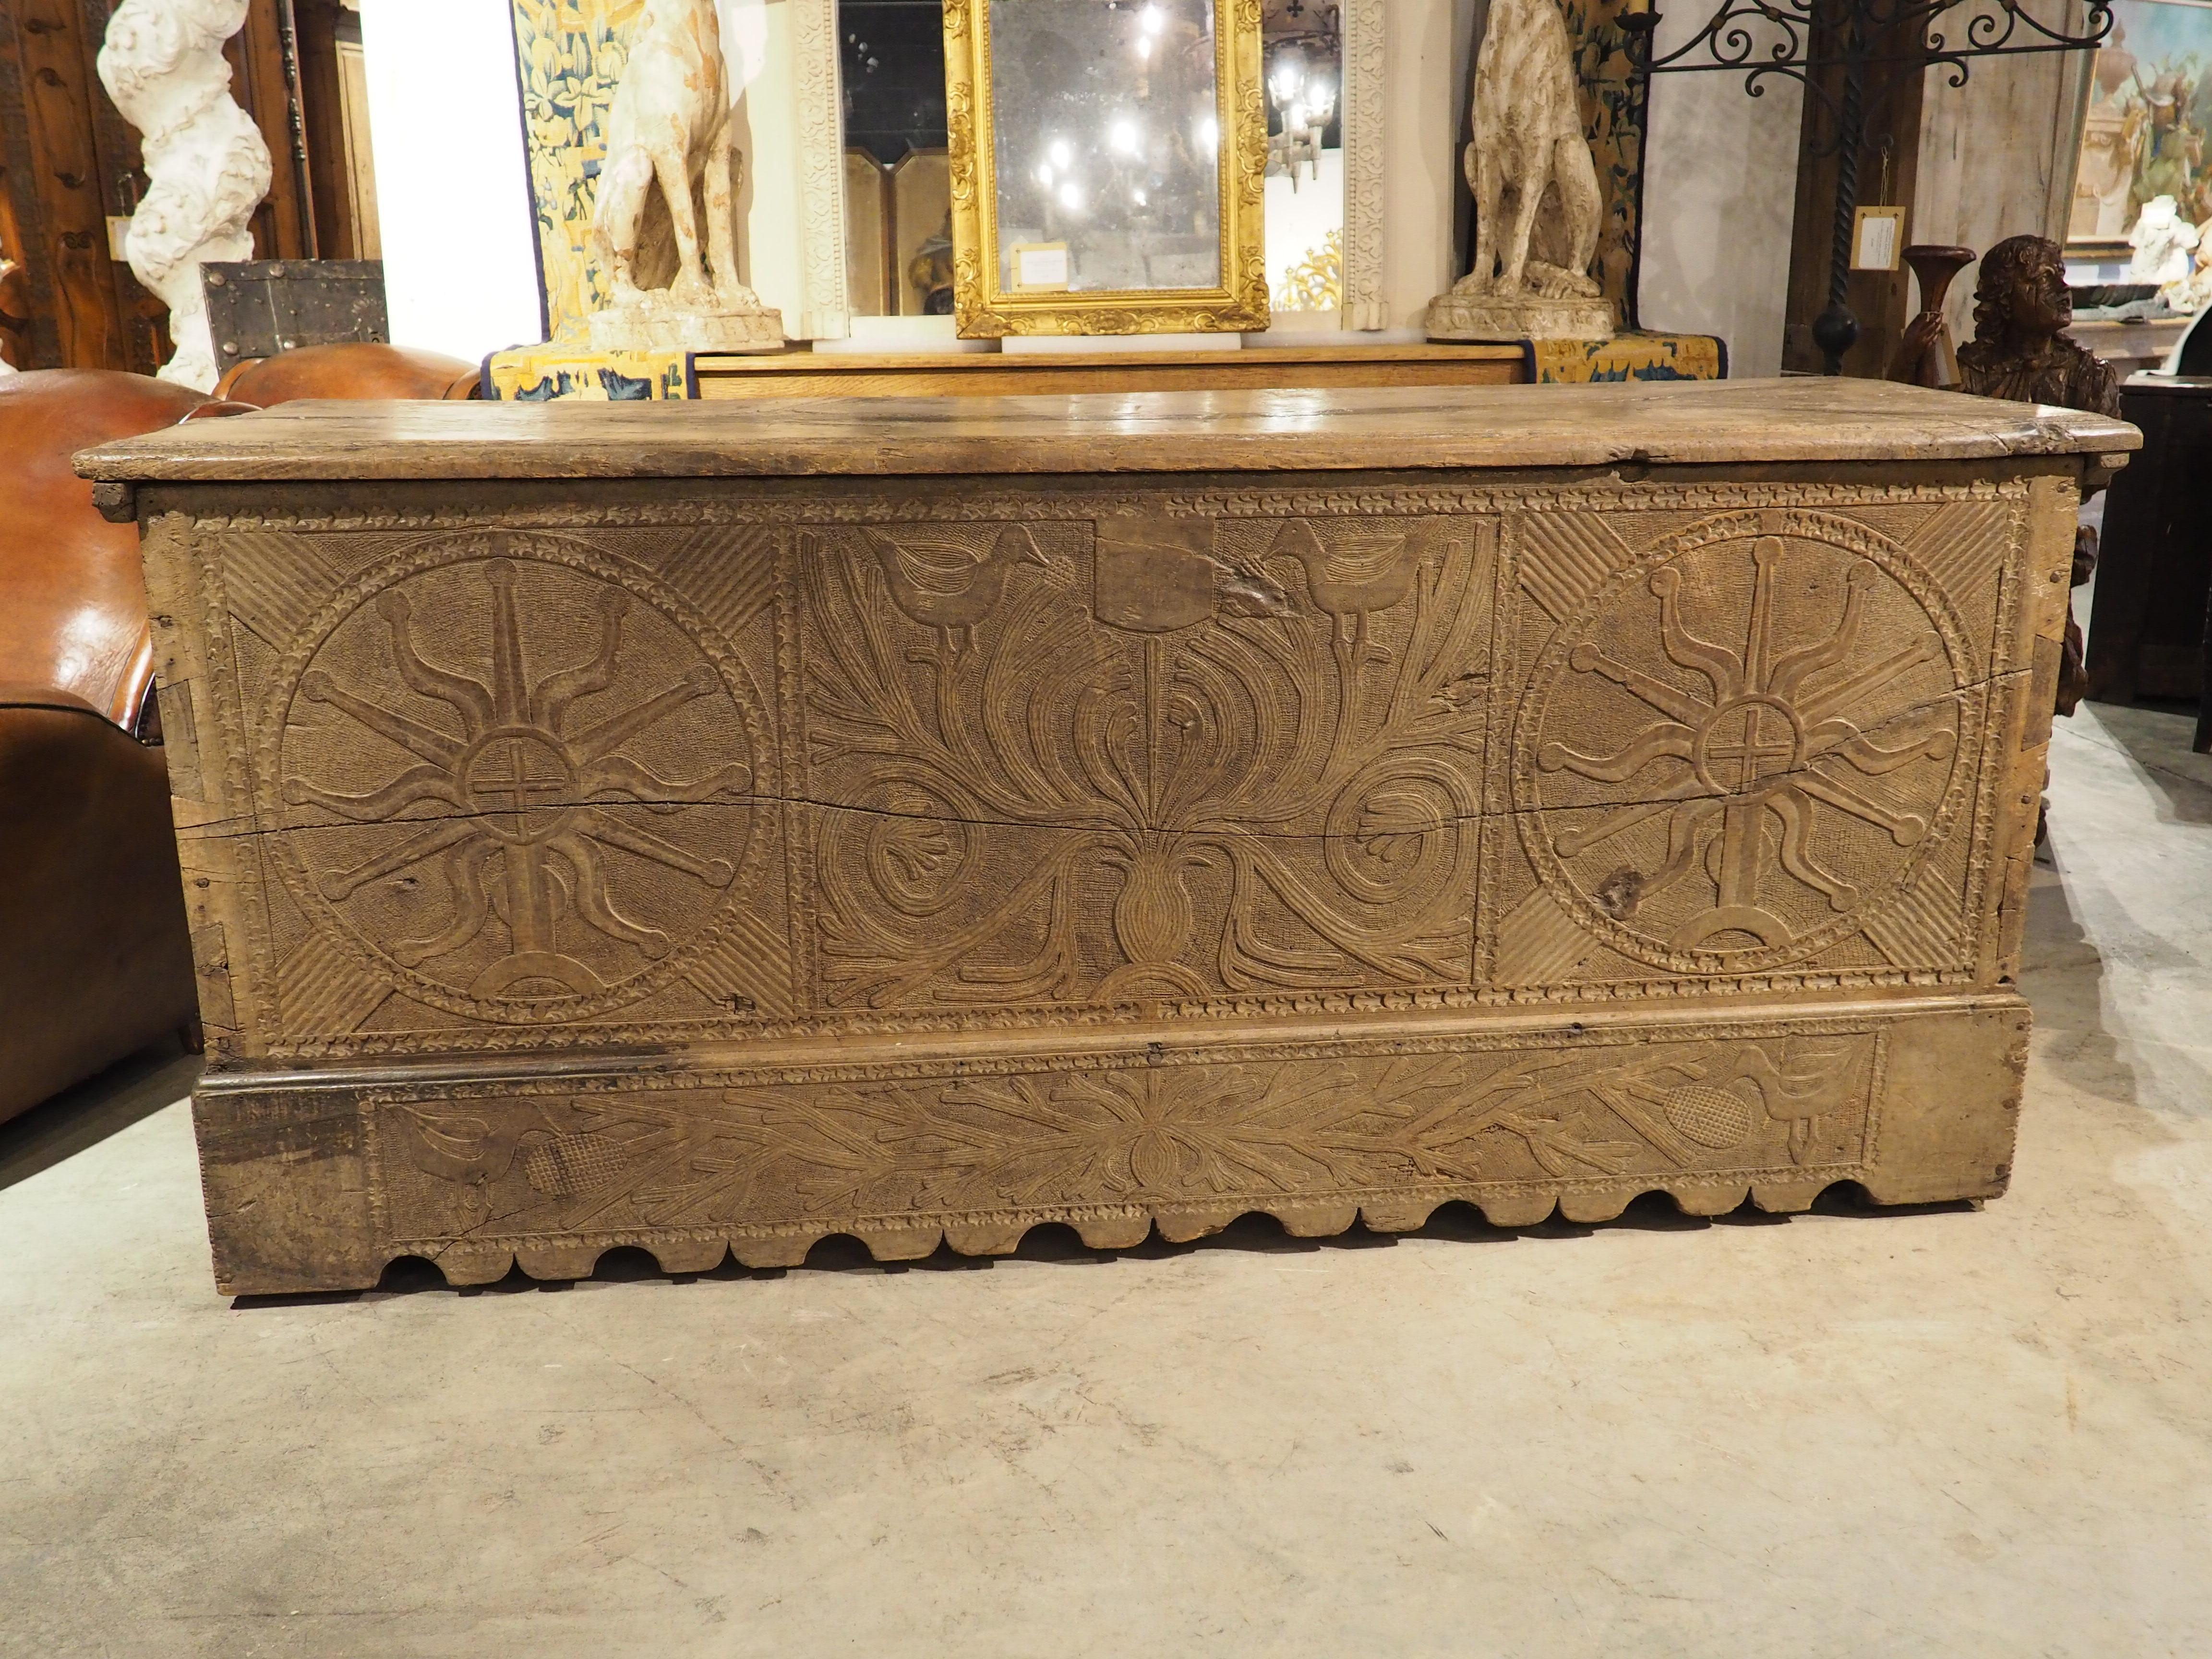 Huge Antique Carved Oak Chest or Trunk from Spain, Late 1500s to Early 1600s 9